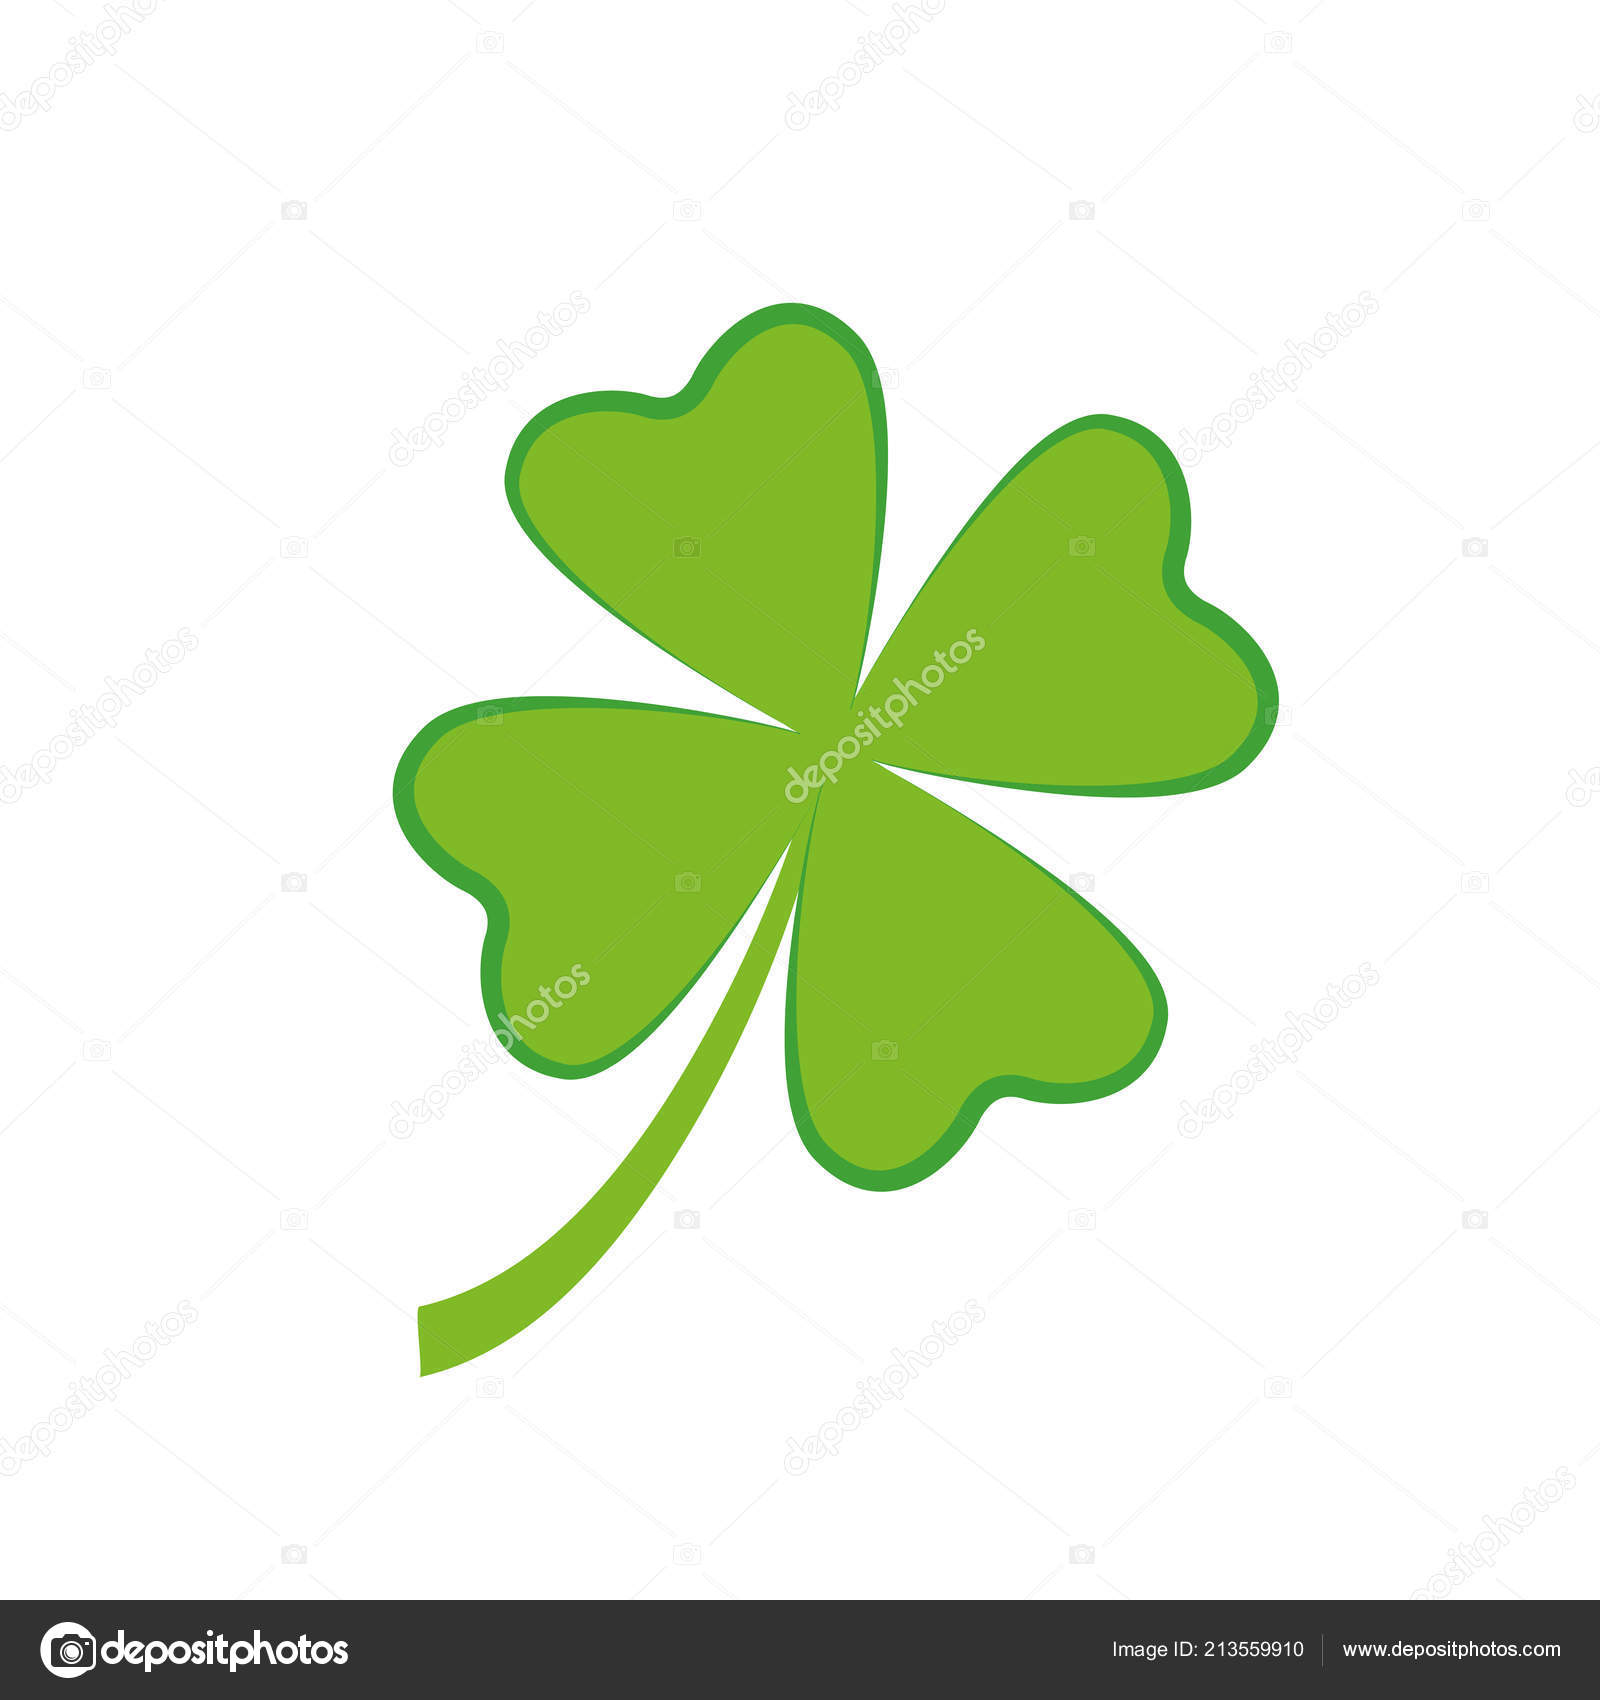 Four Leaf Green Clover Simple Drawing White Background Vector Image By C Krissikunterbunt Vector Stock